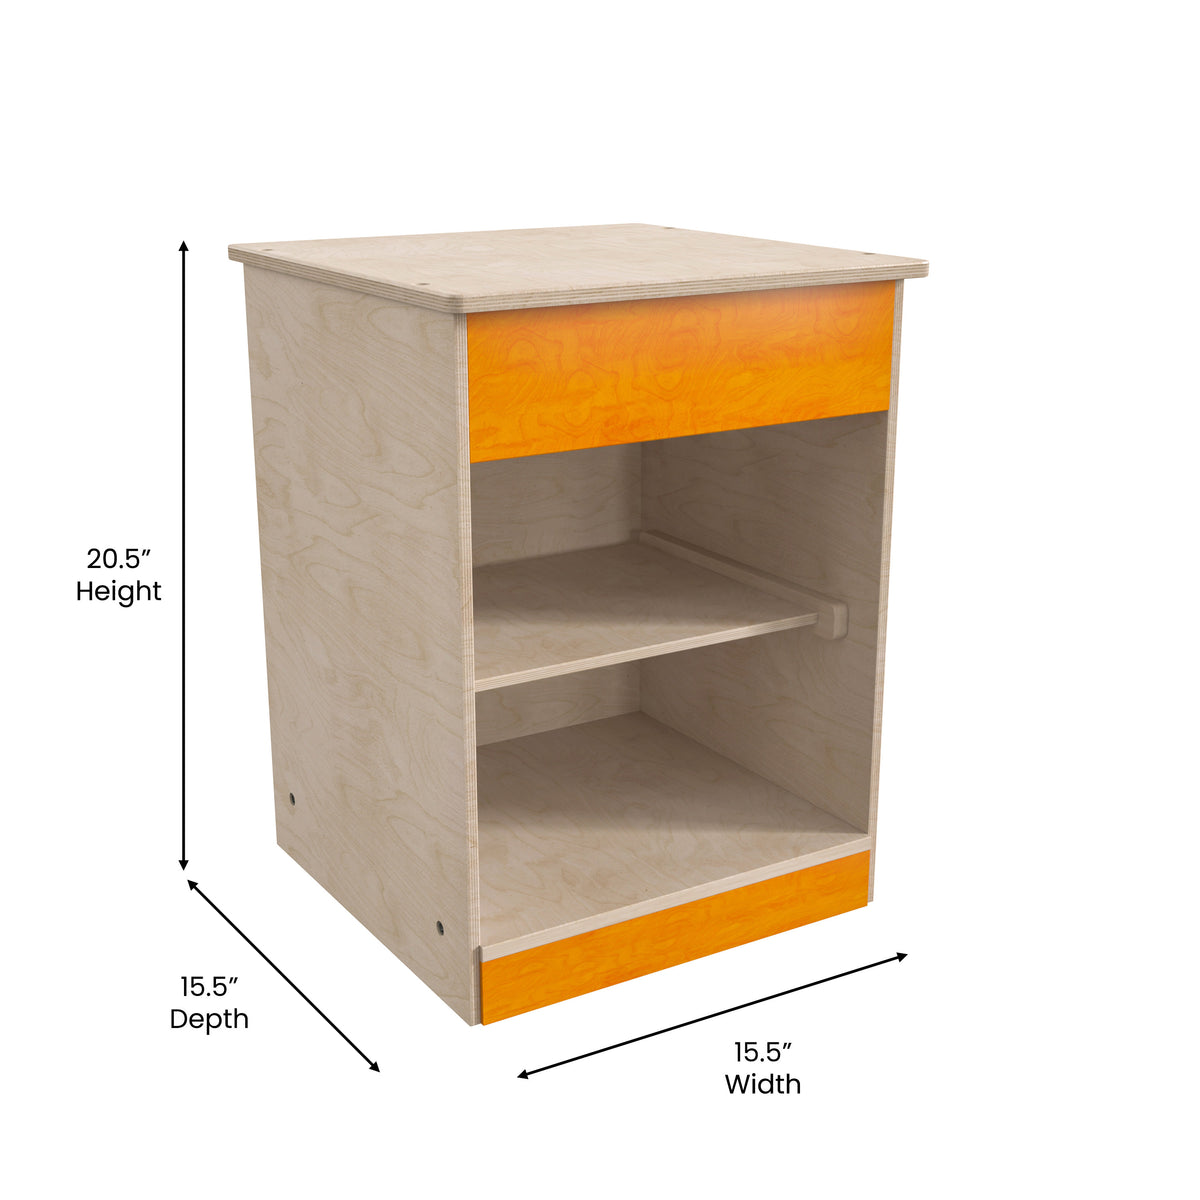 Kid's Commercial Grade Two Shelf Wooden Kitchen Cabinet